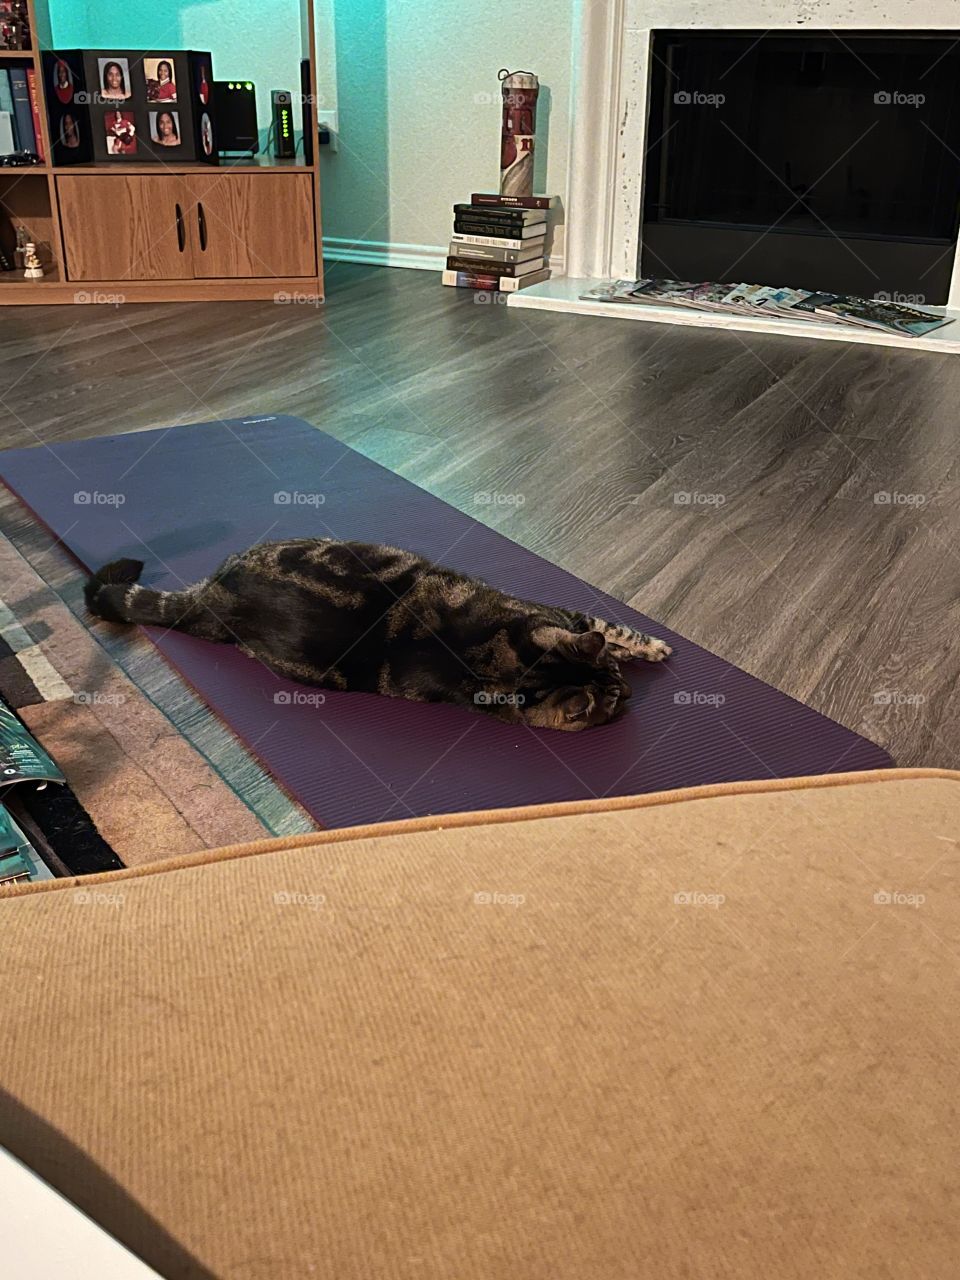 Cat on a purple exercise mat.